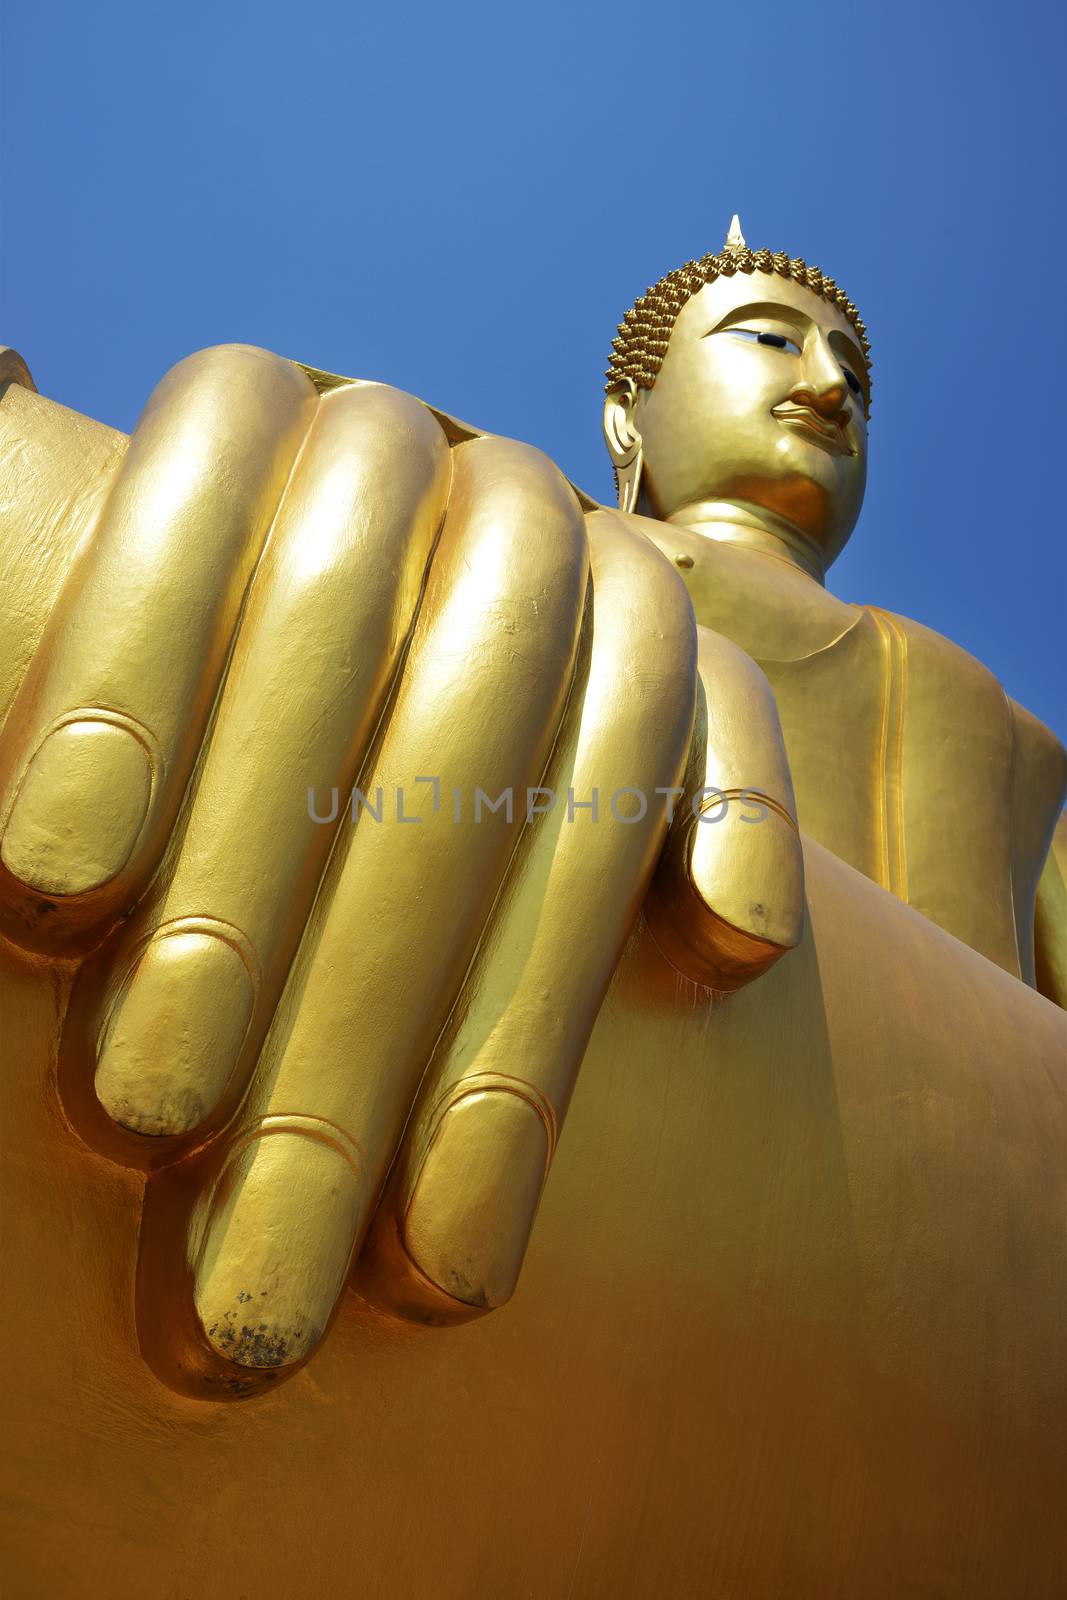 From the hand of golden buddha looking above to buddha face.